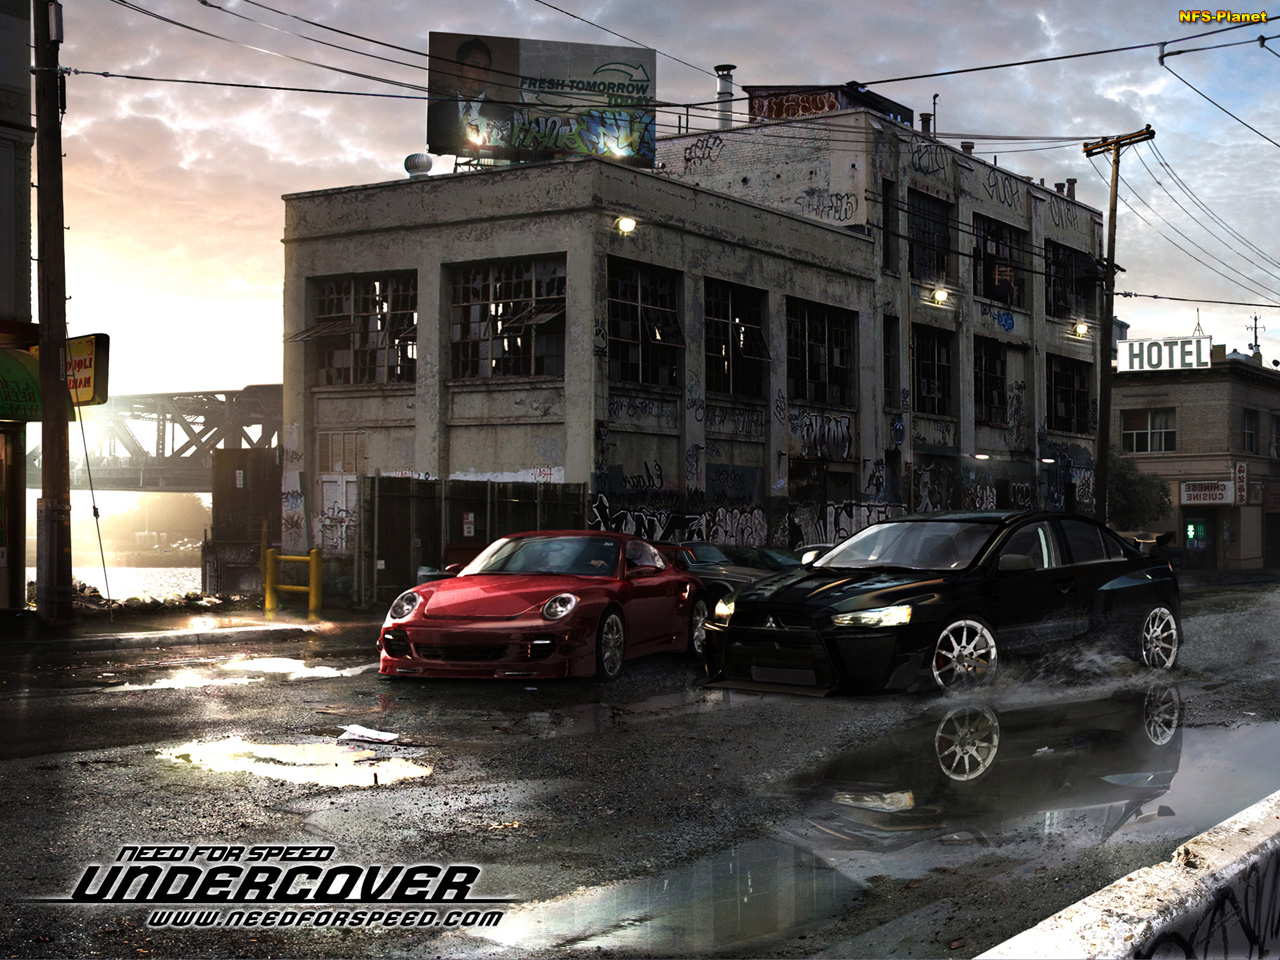 Need for Speed Undercover - Free desktop wallpapers download